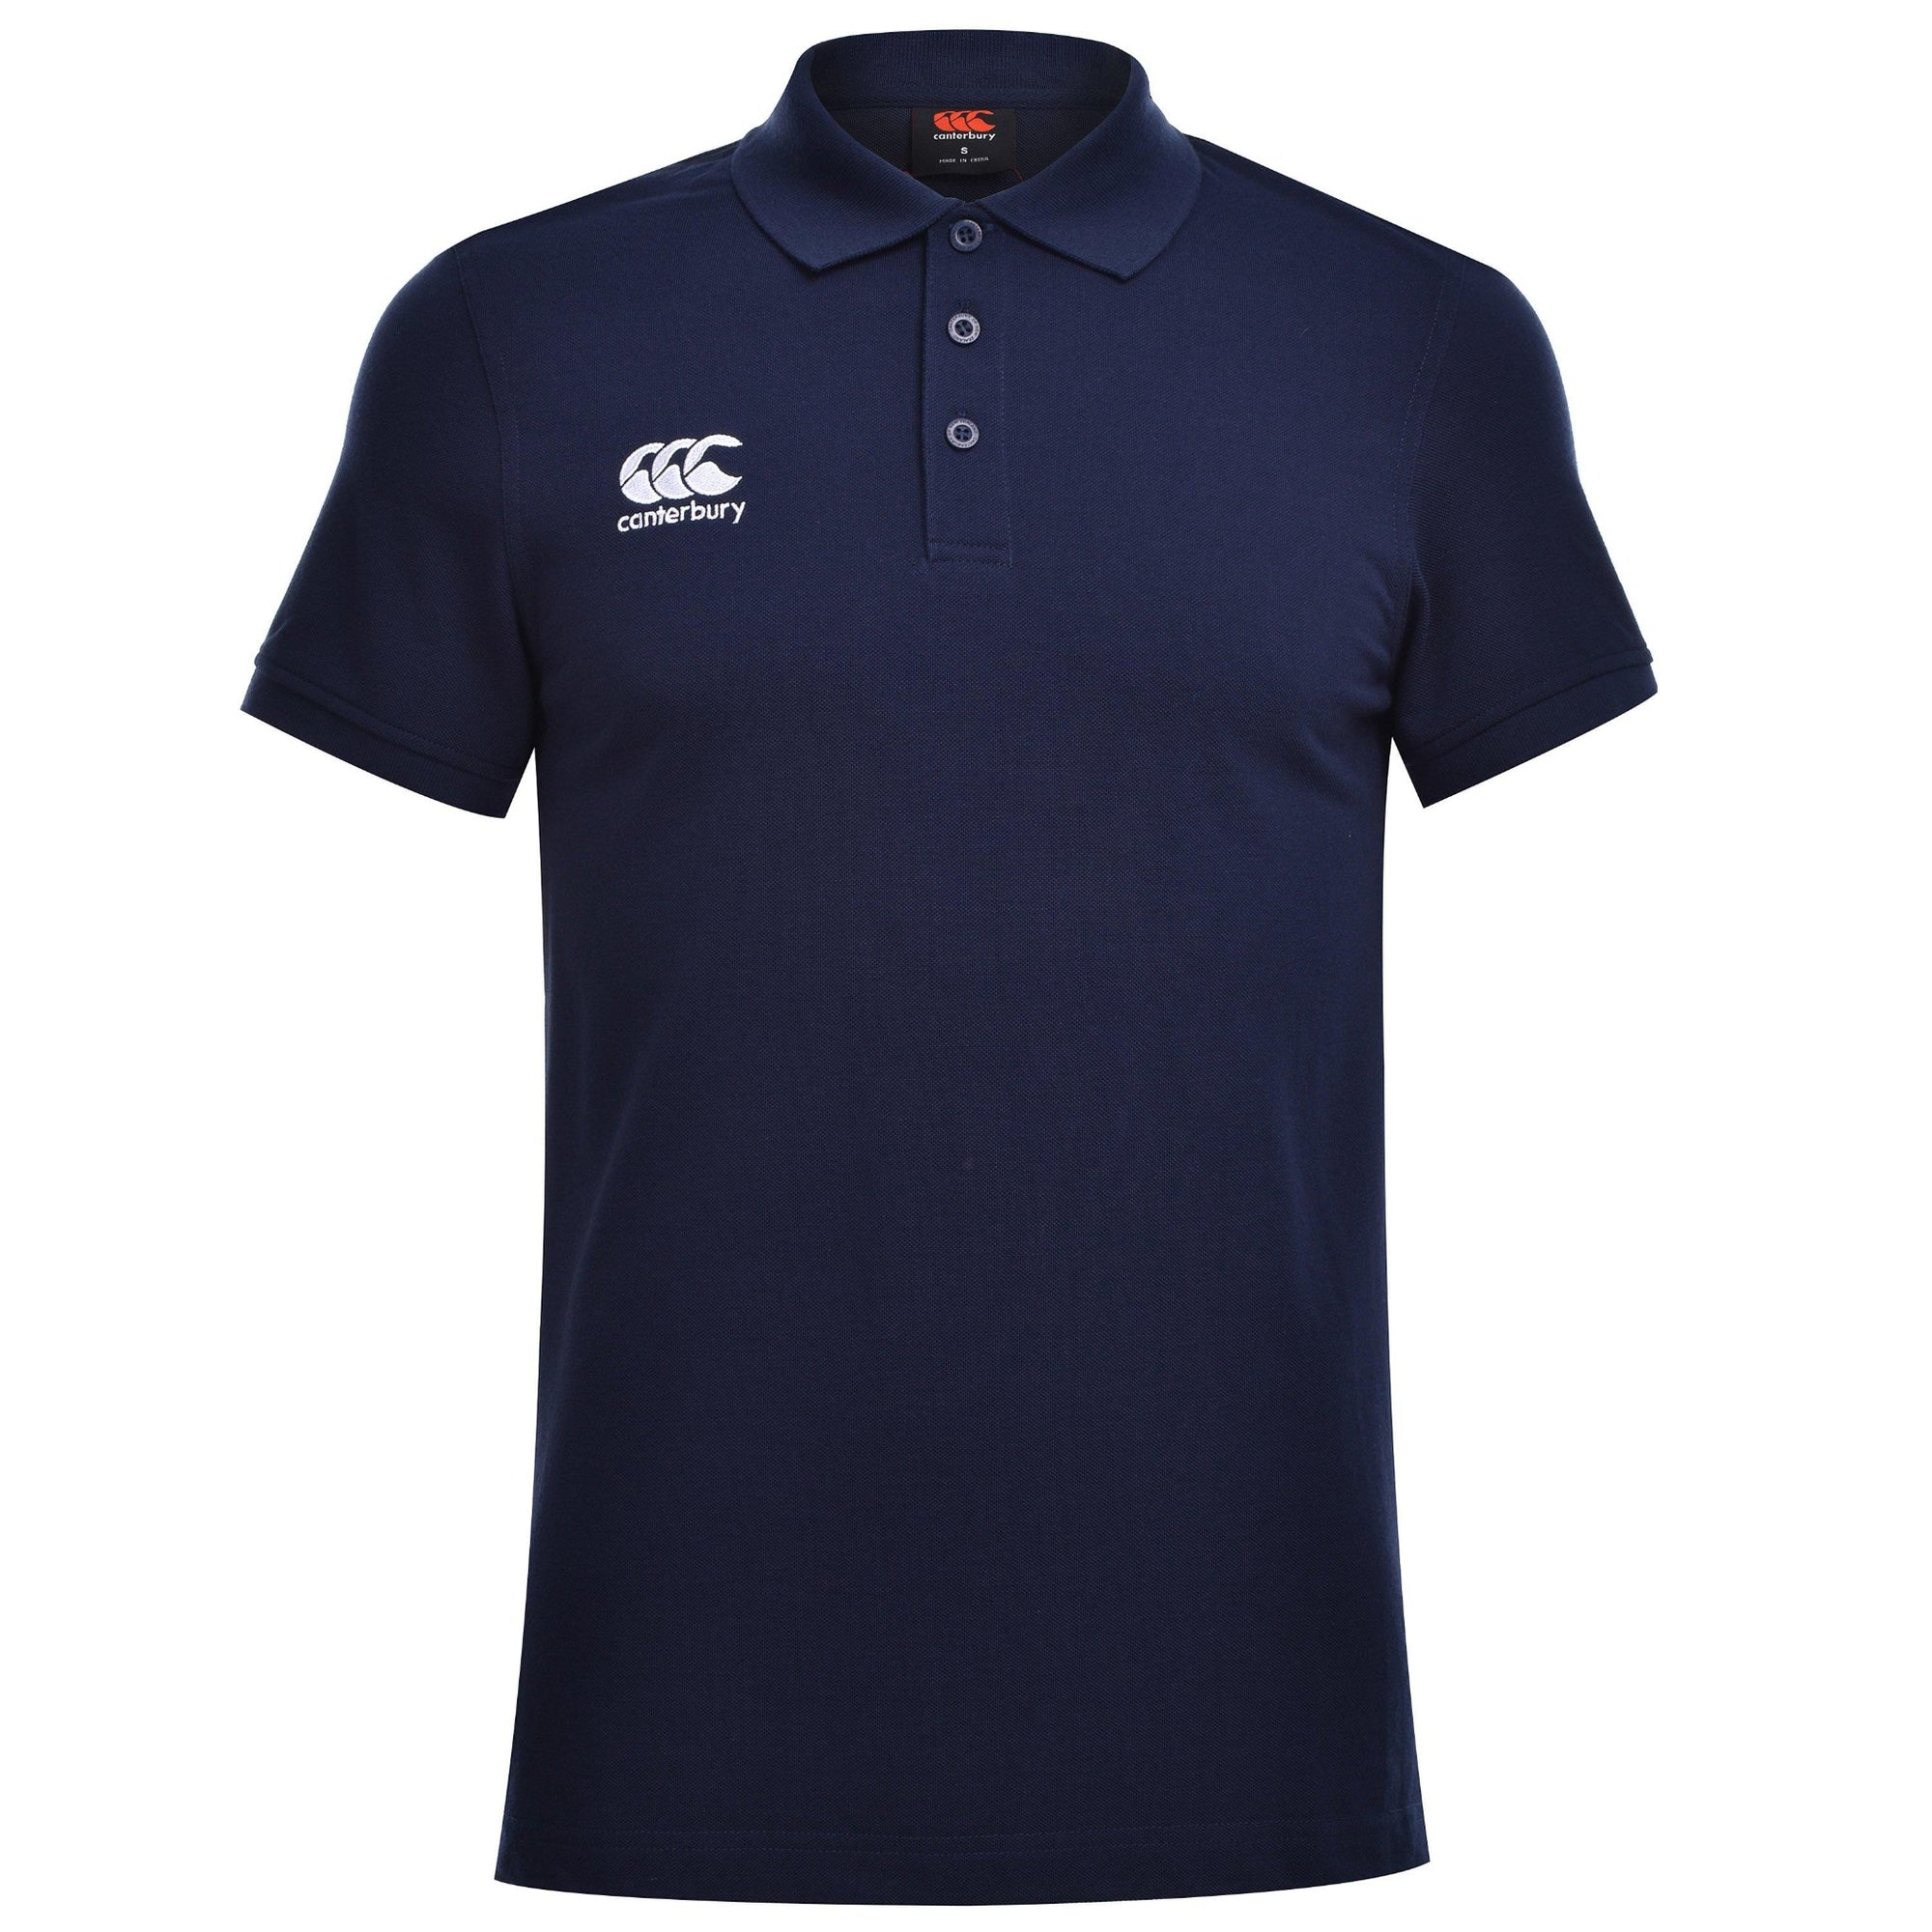 POLOS - The Rugby Shop